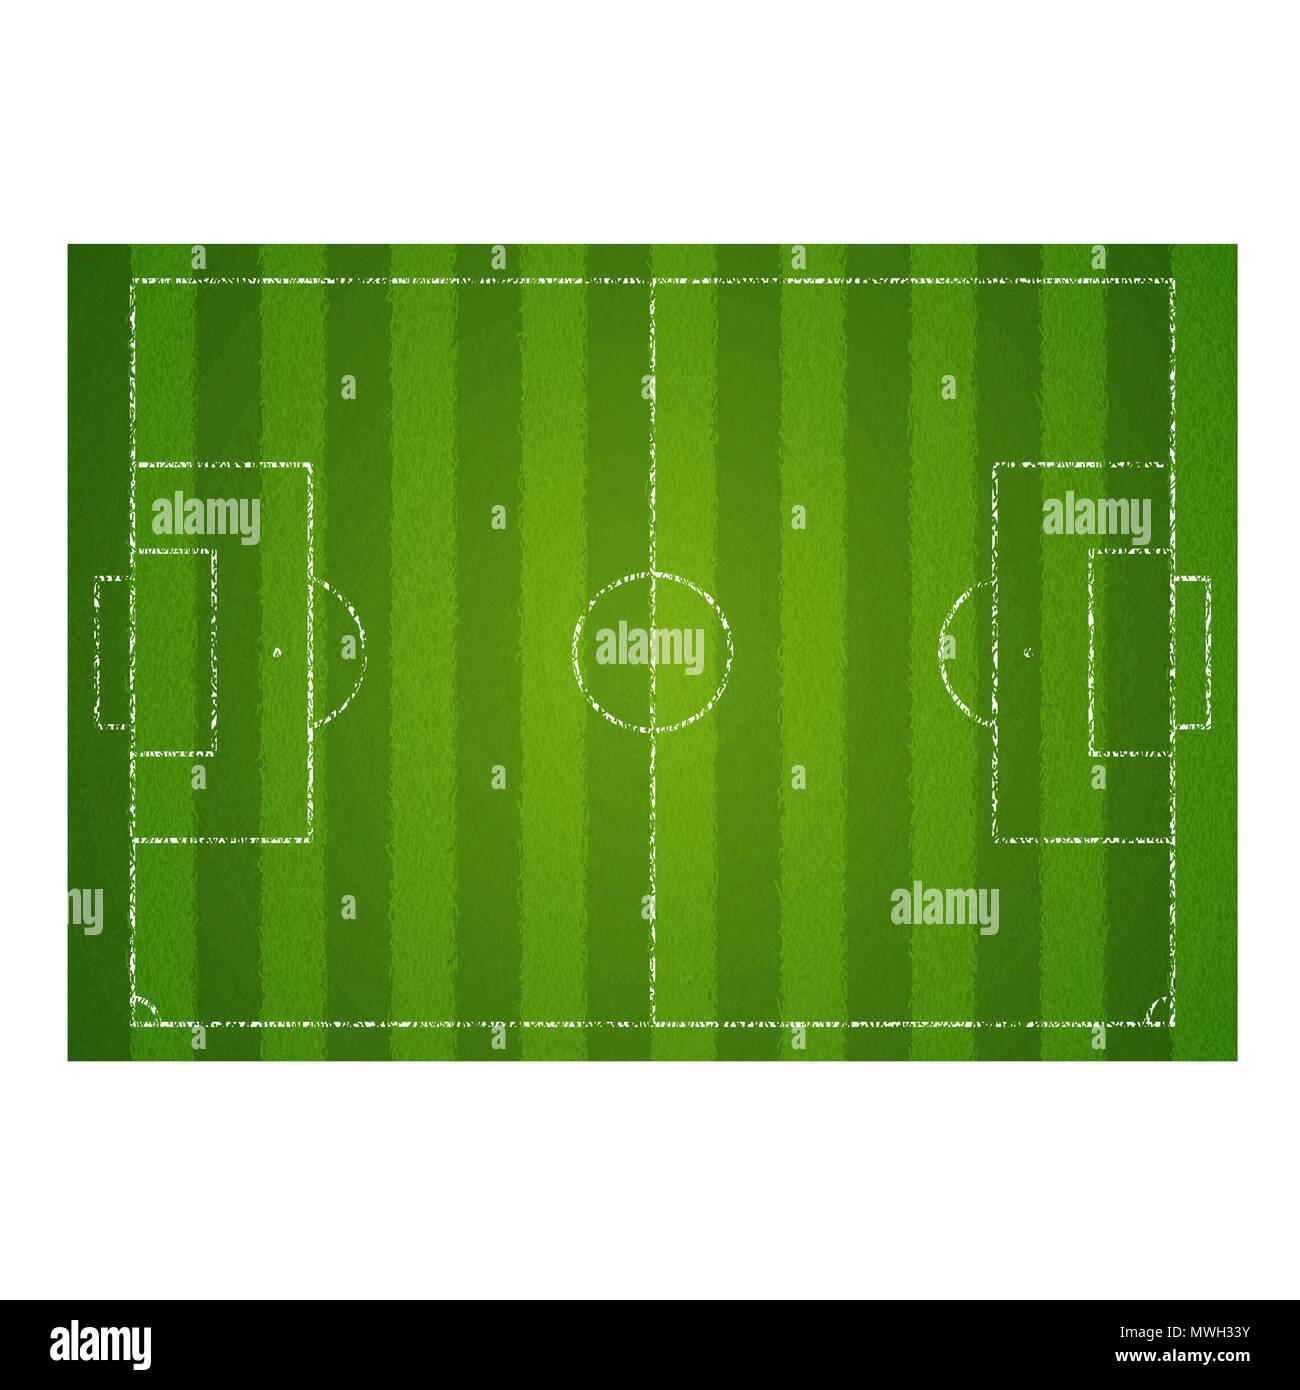 Realistic textured grass football field. Soccer pitch. Empty soccer field top view. Vector illustration isolated on white background Stock Vector